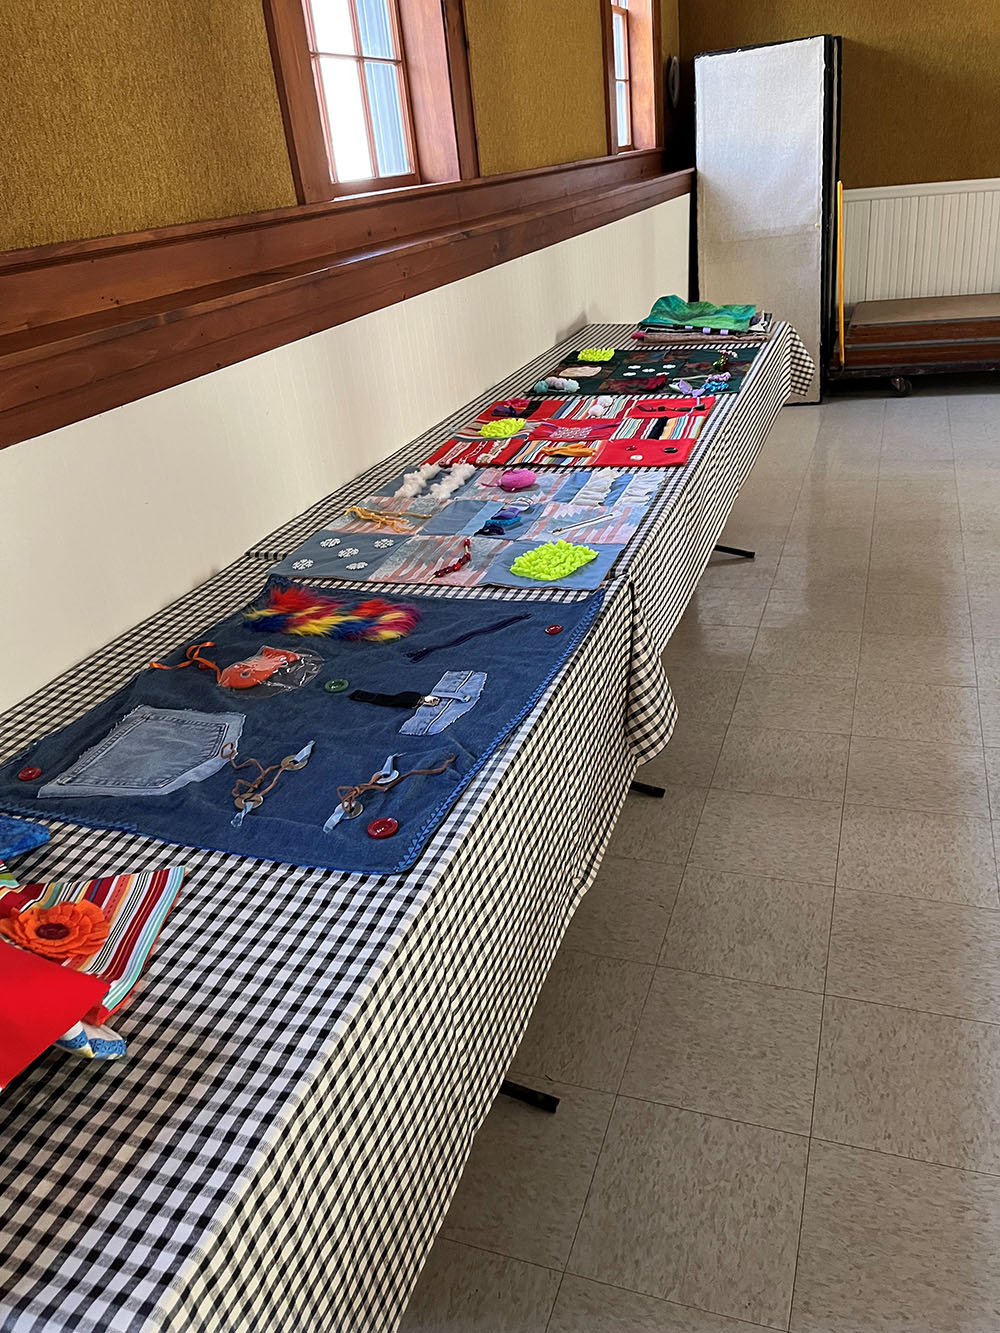 Several dementia blankets displayed across a long table.